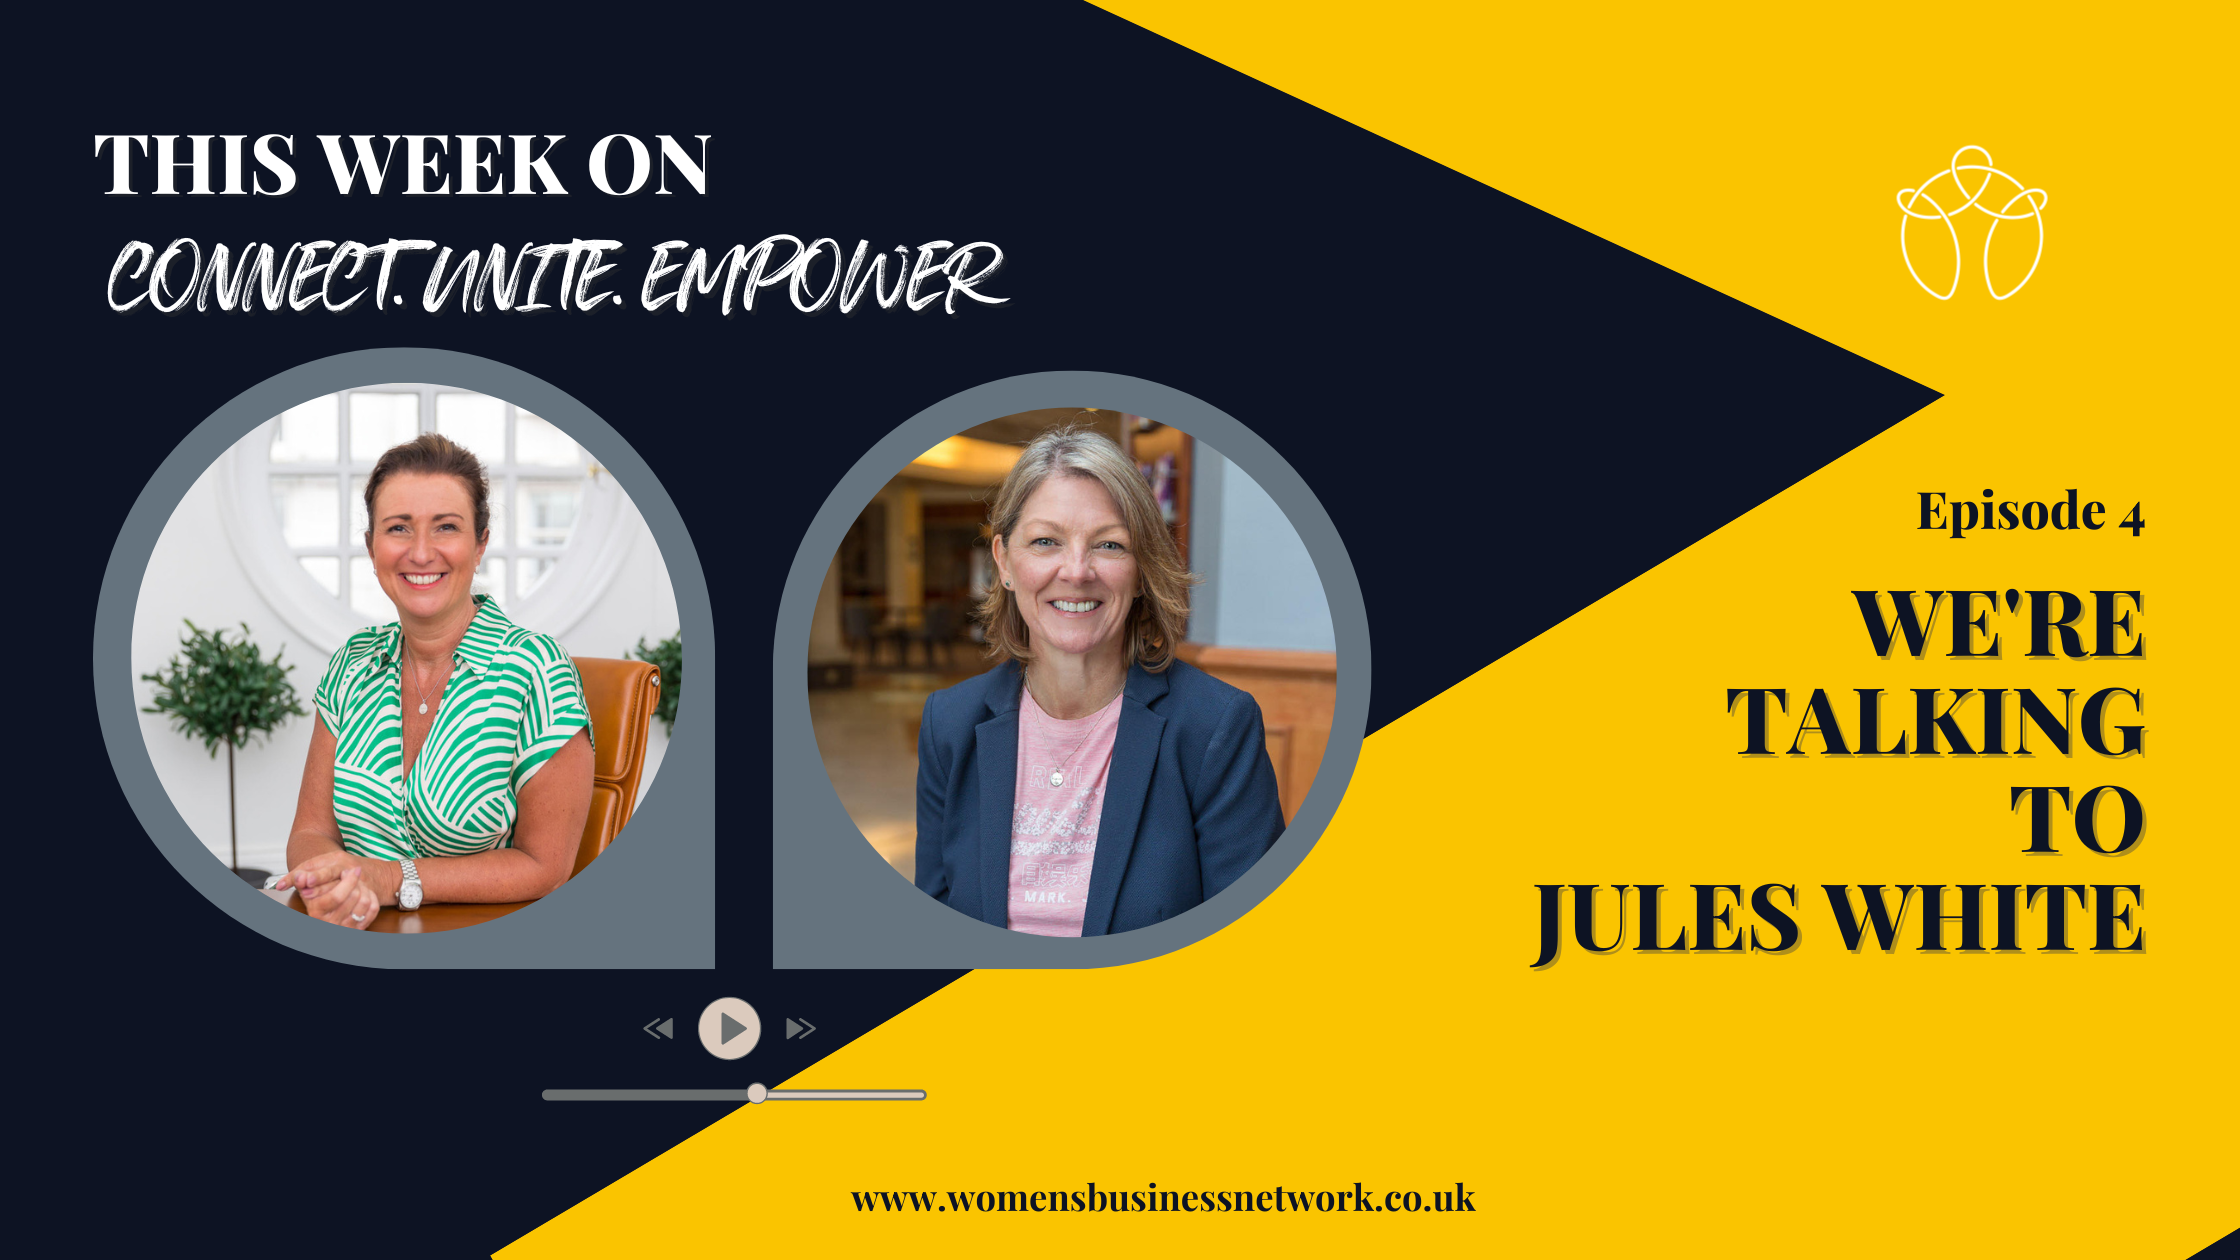 Connect, Unite, Empower 4: Overcoming Challenges And Bouncebackability With Jules White